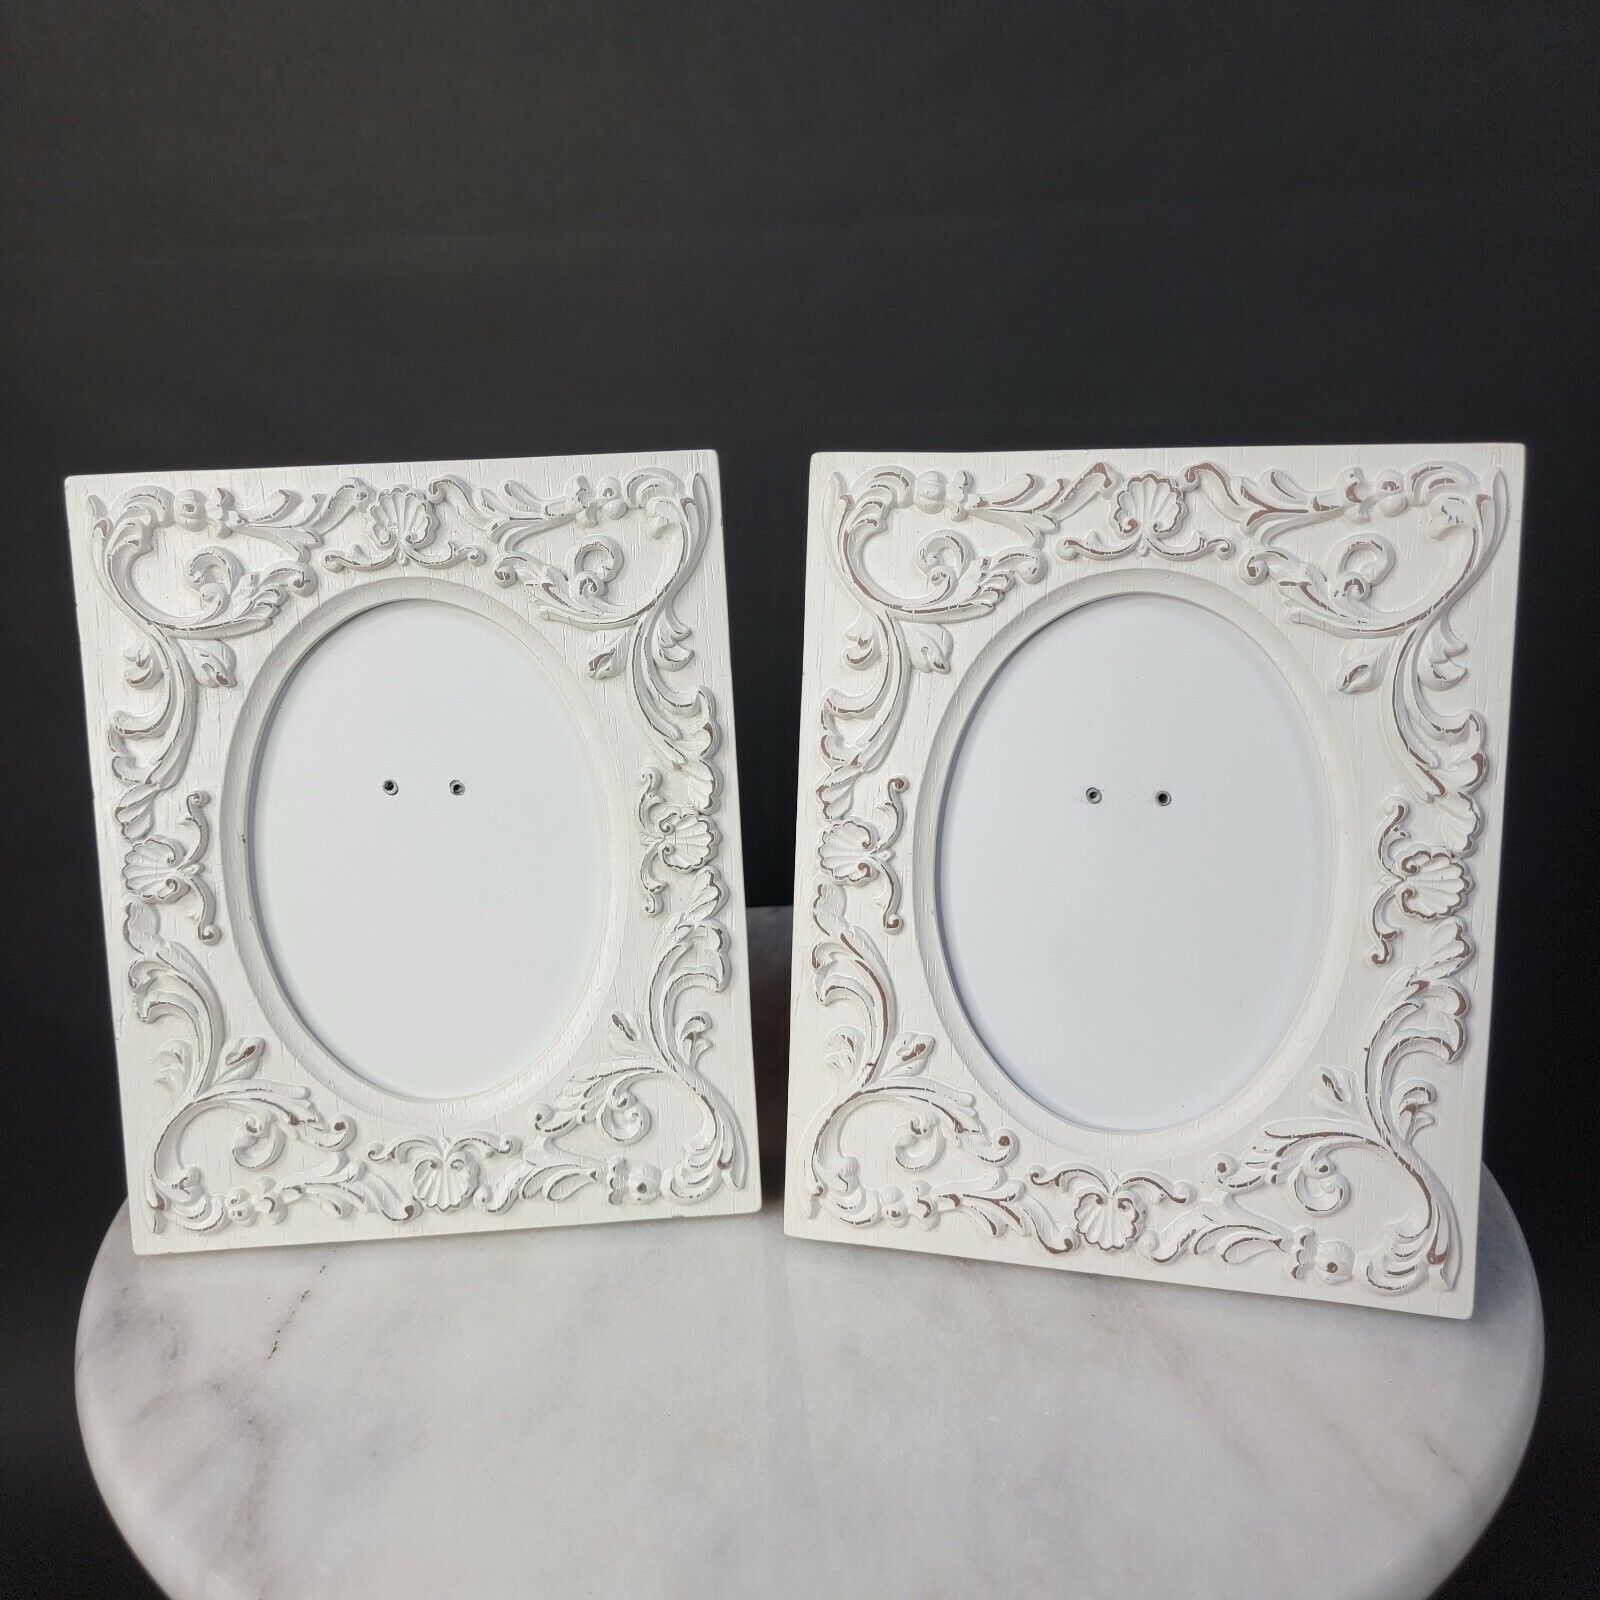 2 Rachel Ashwell Simply Shabby Chic White Picture Frames Heavy Antique Style